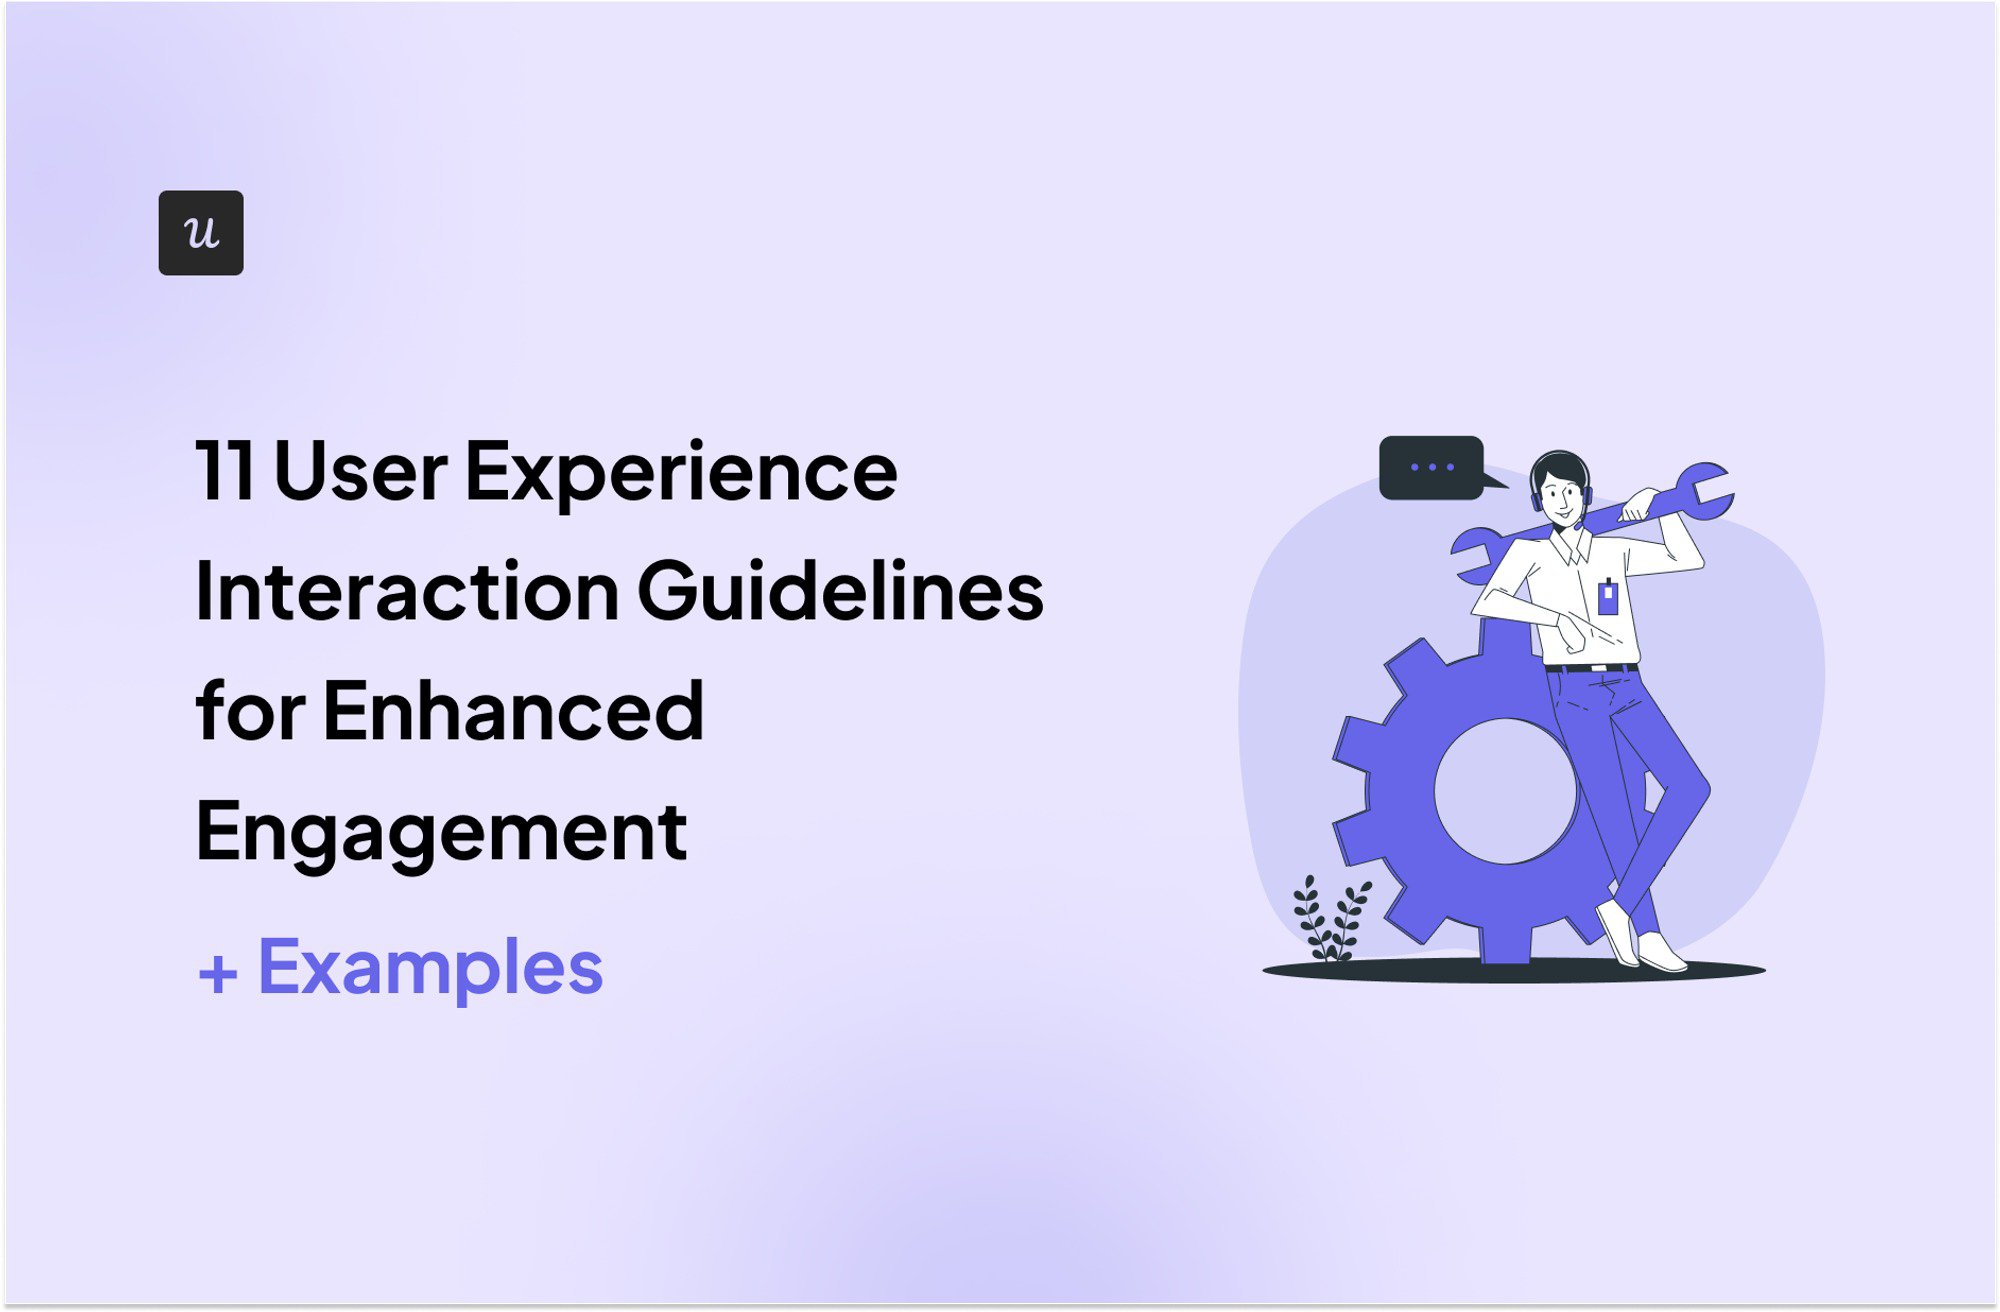 11 User Experience Interaction Guidelines for Enhanced Engagement [+ Examples] cover